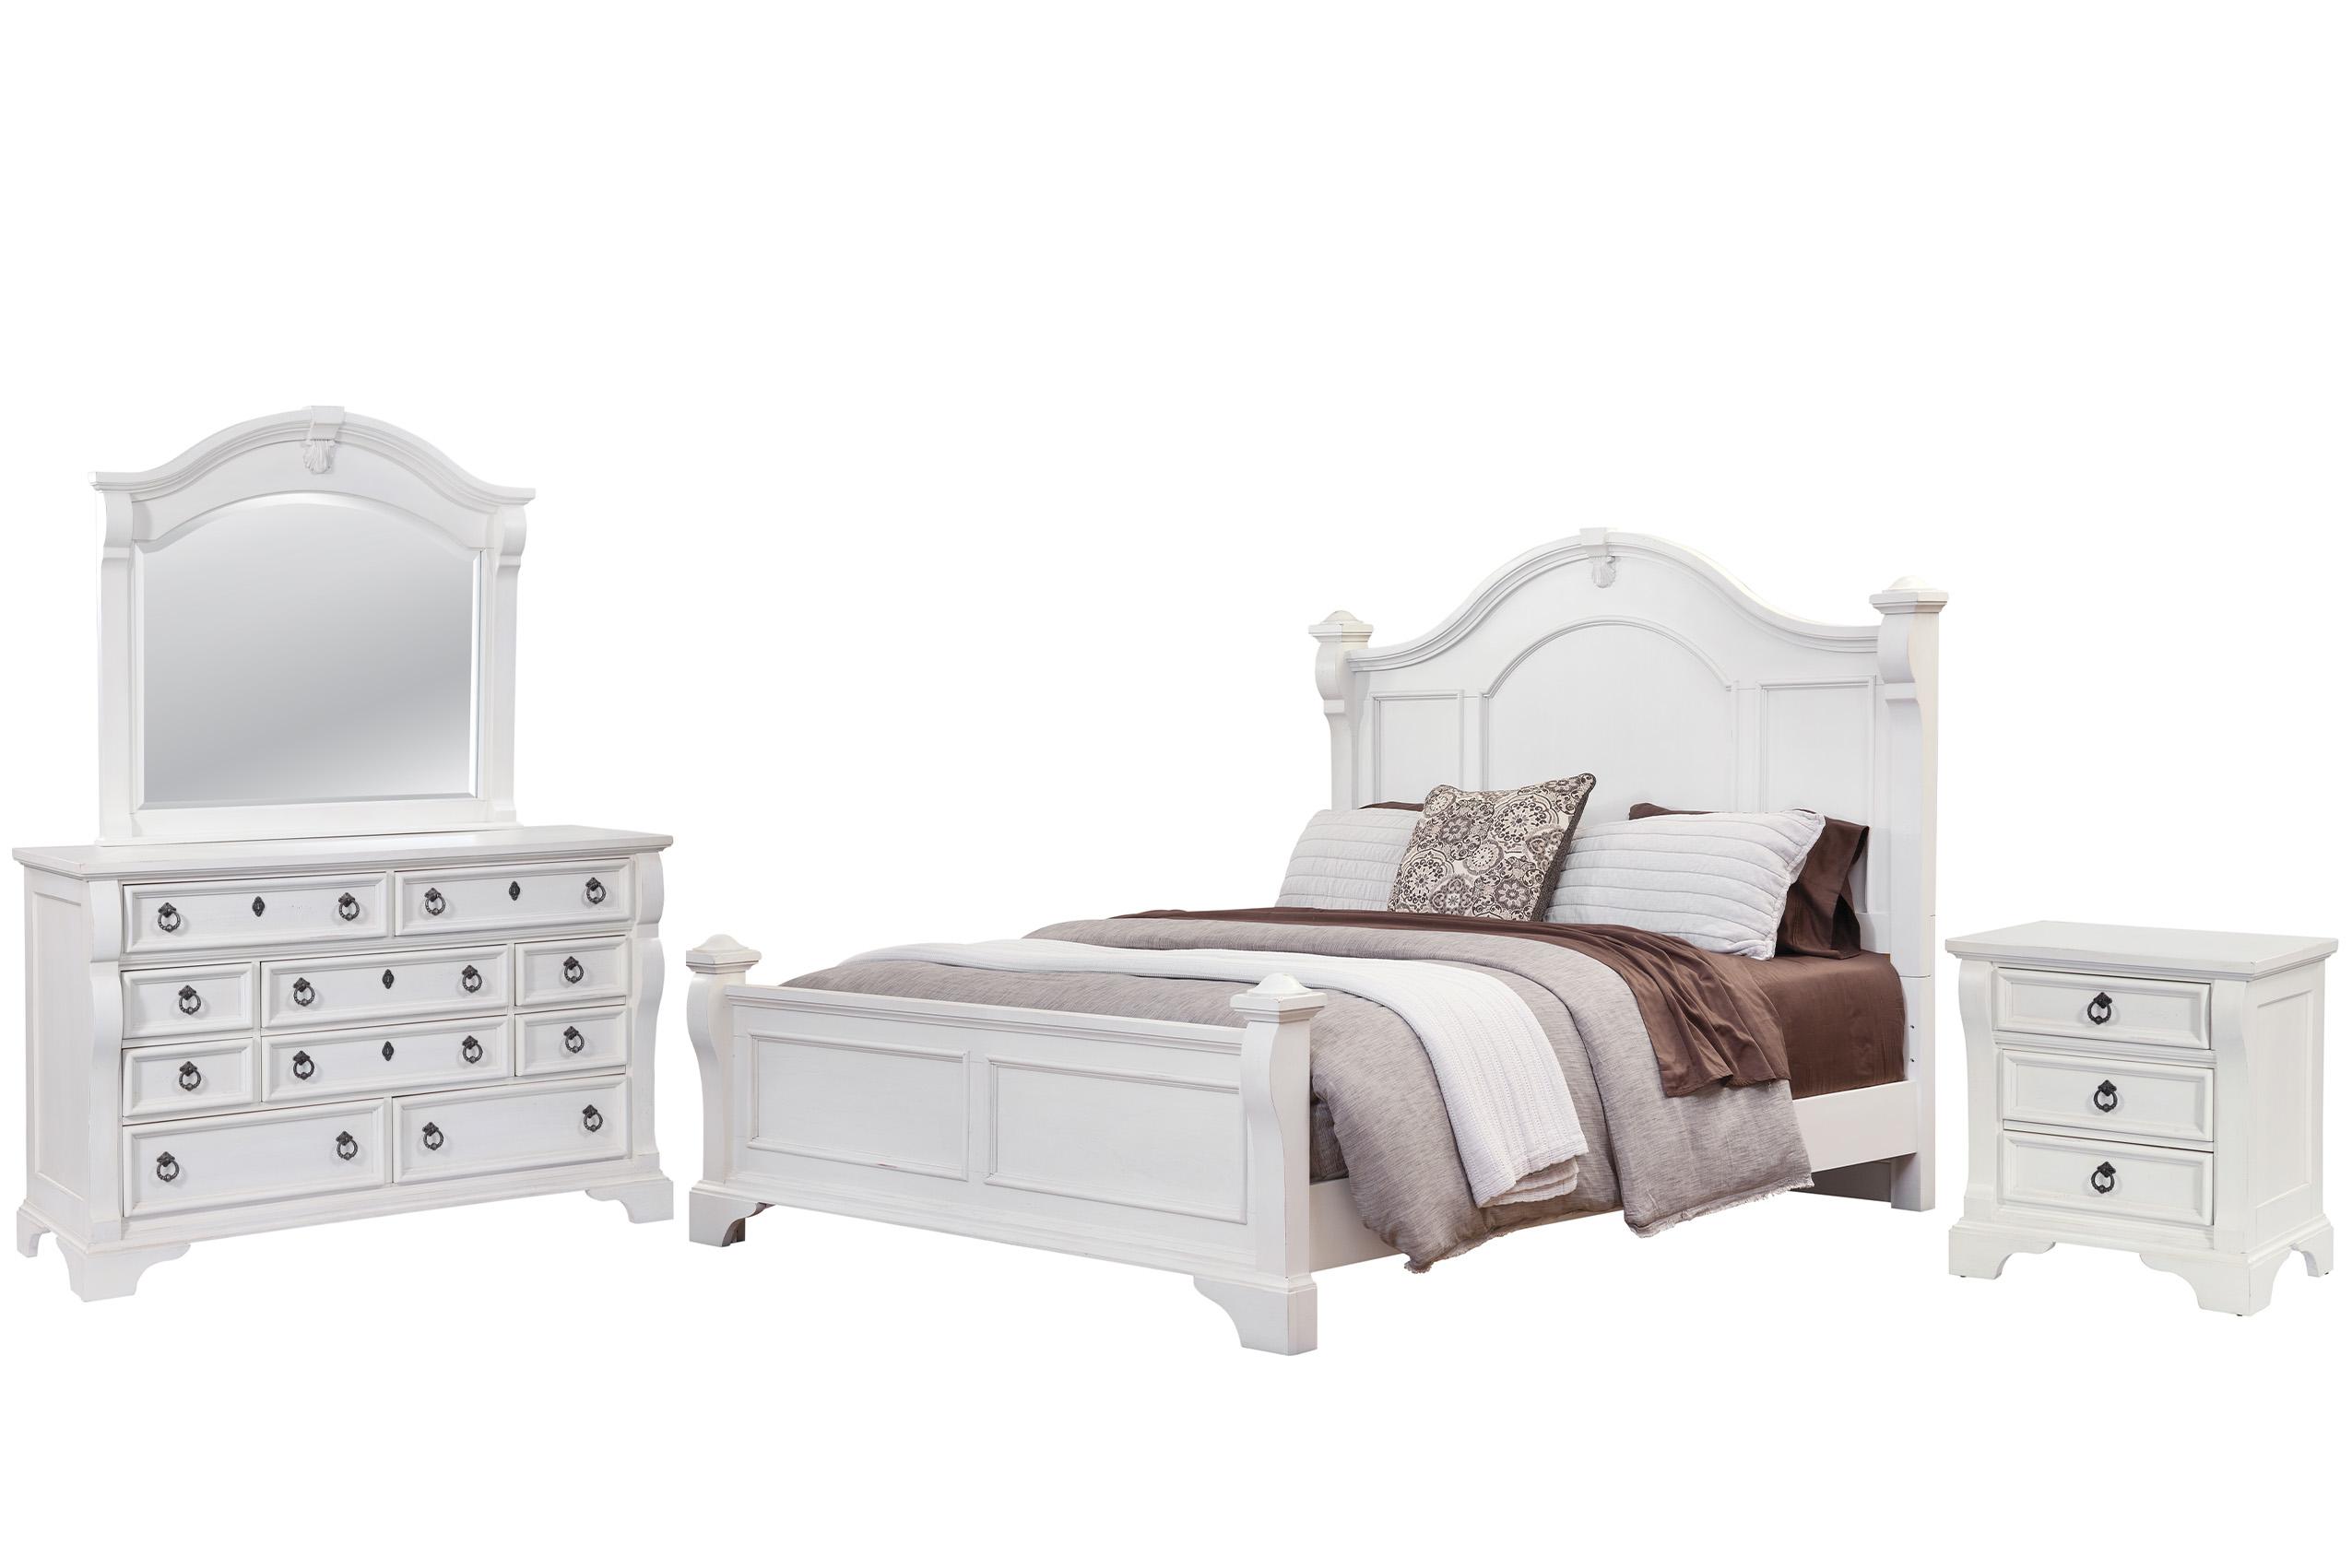 Classic, Traditional, Cottage Poster Bedroom Set HEIRLOOM 2910-50POS 2910-QPOPO-4PC in White 